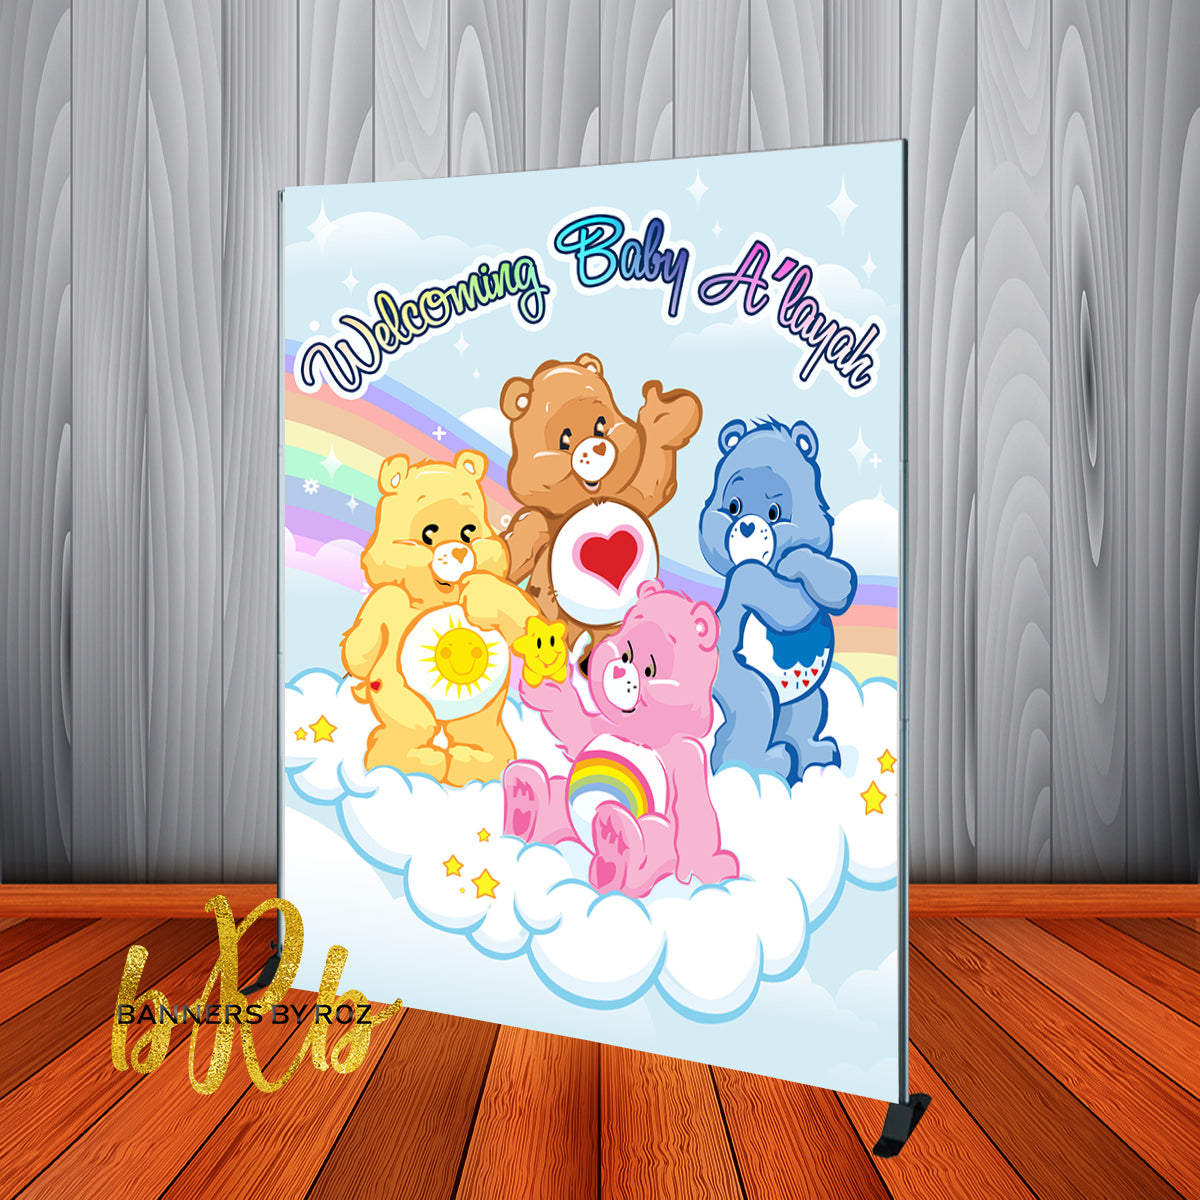 CARE BEARS RAINBOW PERSONALISED BIRTHDAY PARTY SUPPLIES BANNER BACKDROP  DECORATI